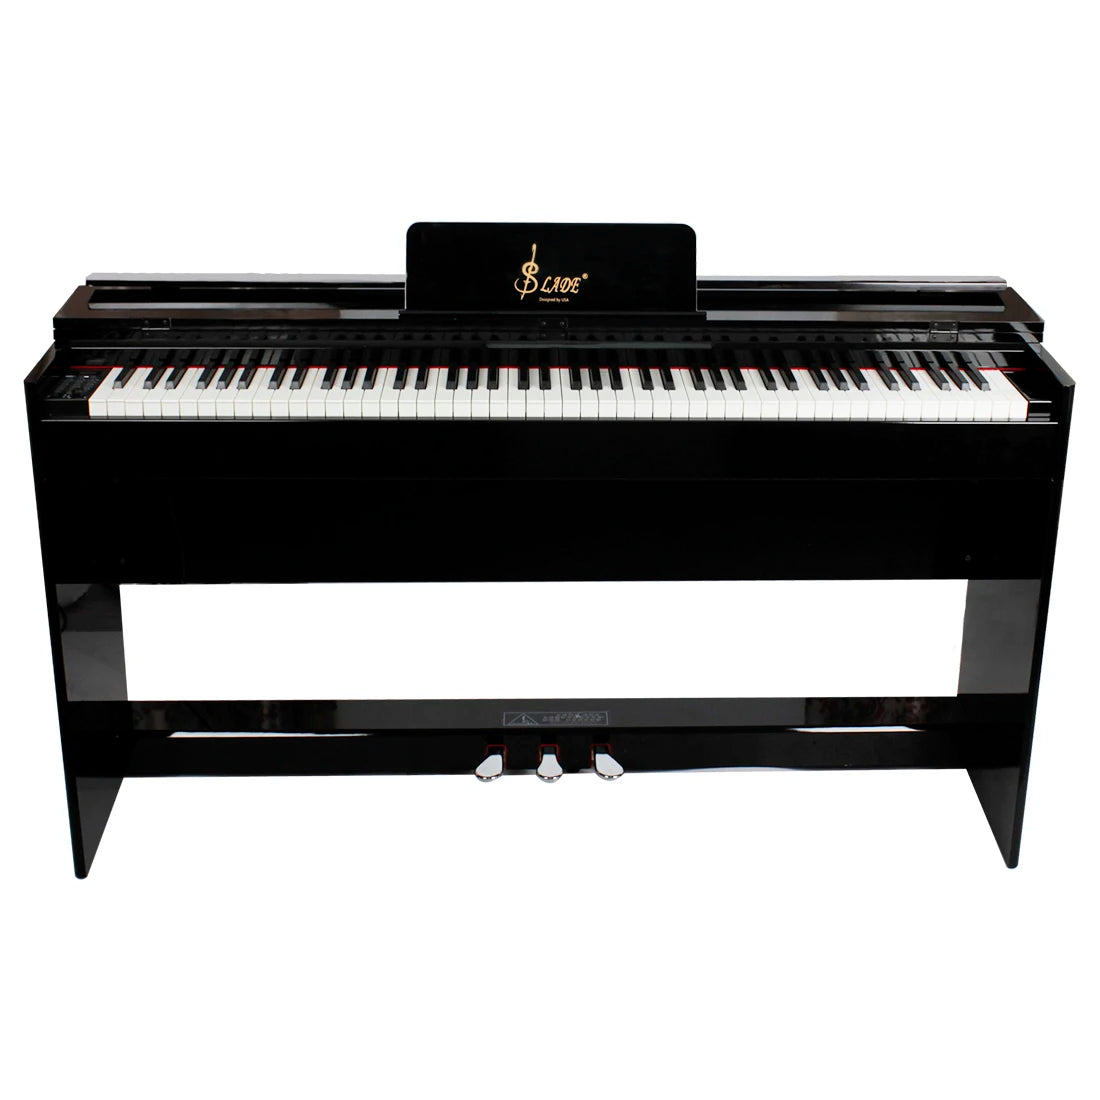 SLADE 88 Keys Upright Piano Professional Digital Electronic Black Piano Weighted Keyboard Instrument with Piano Bench